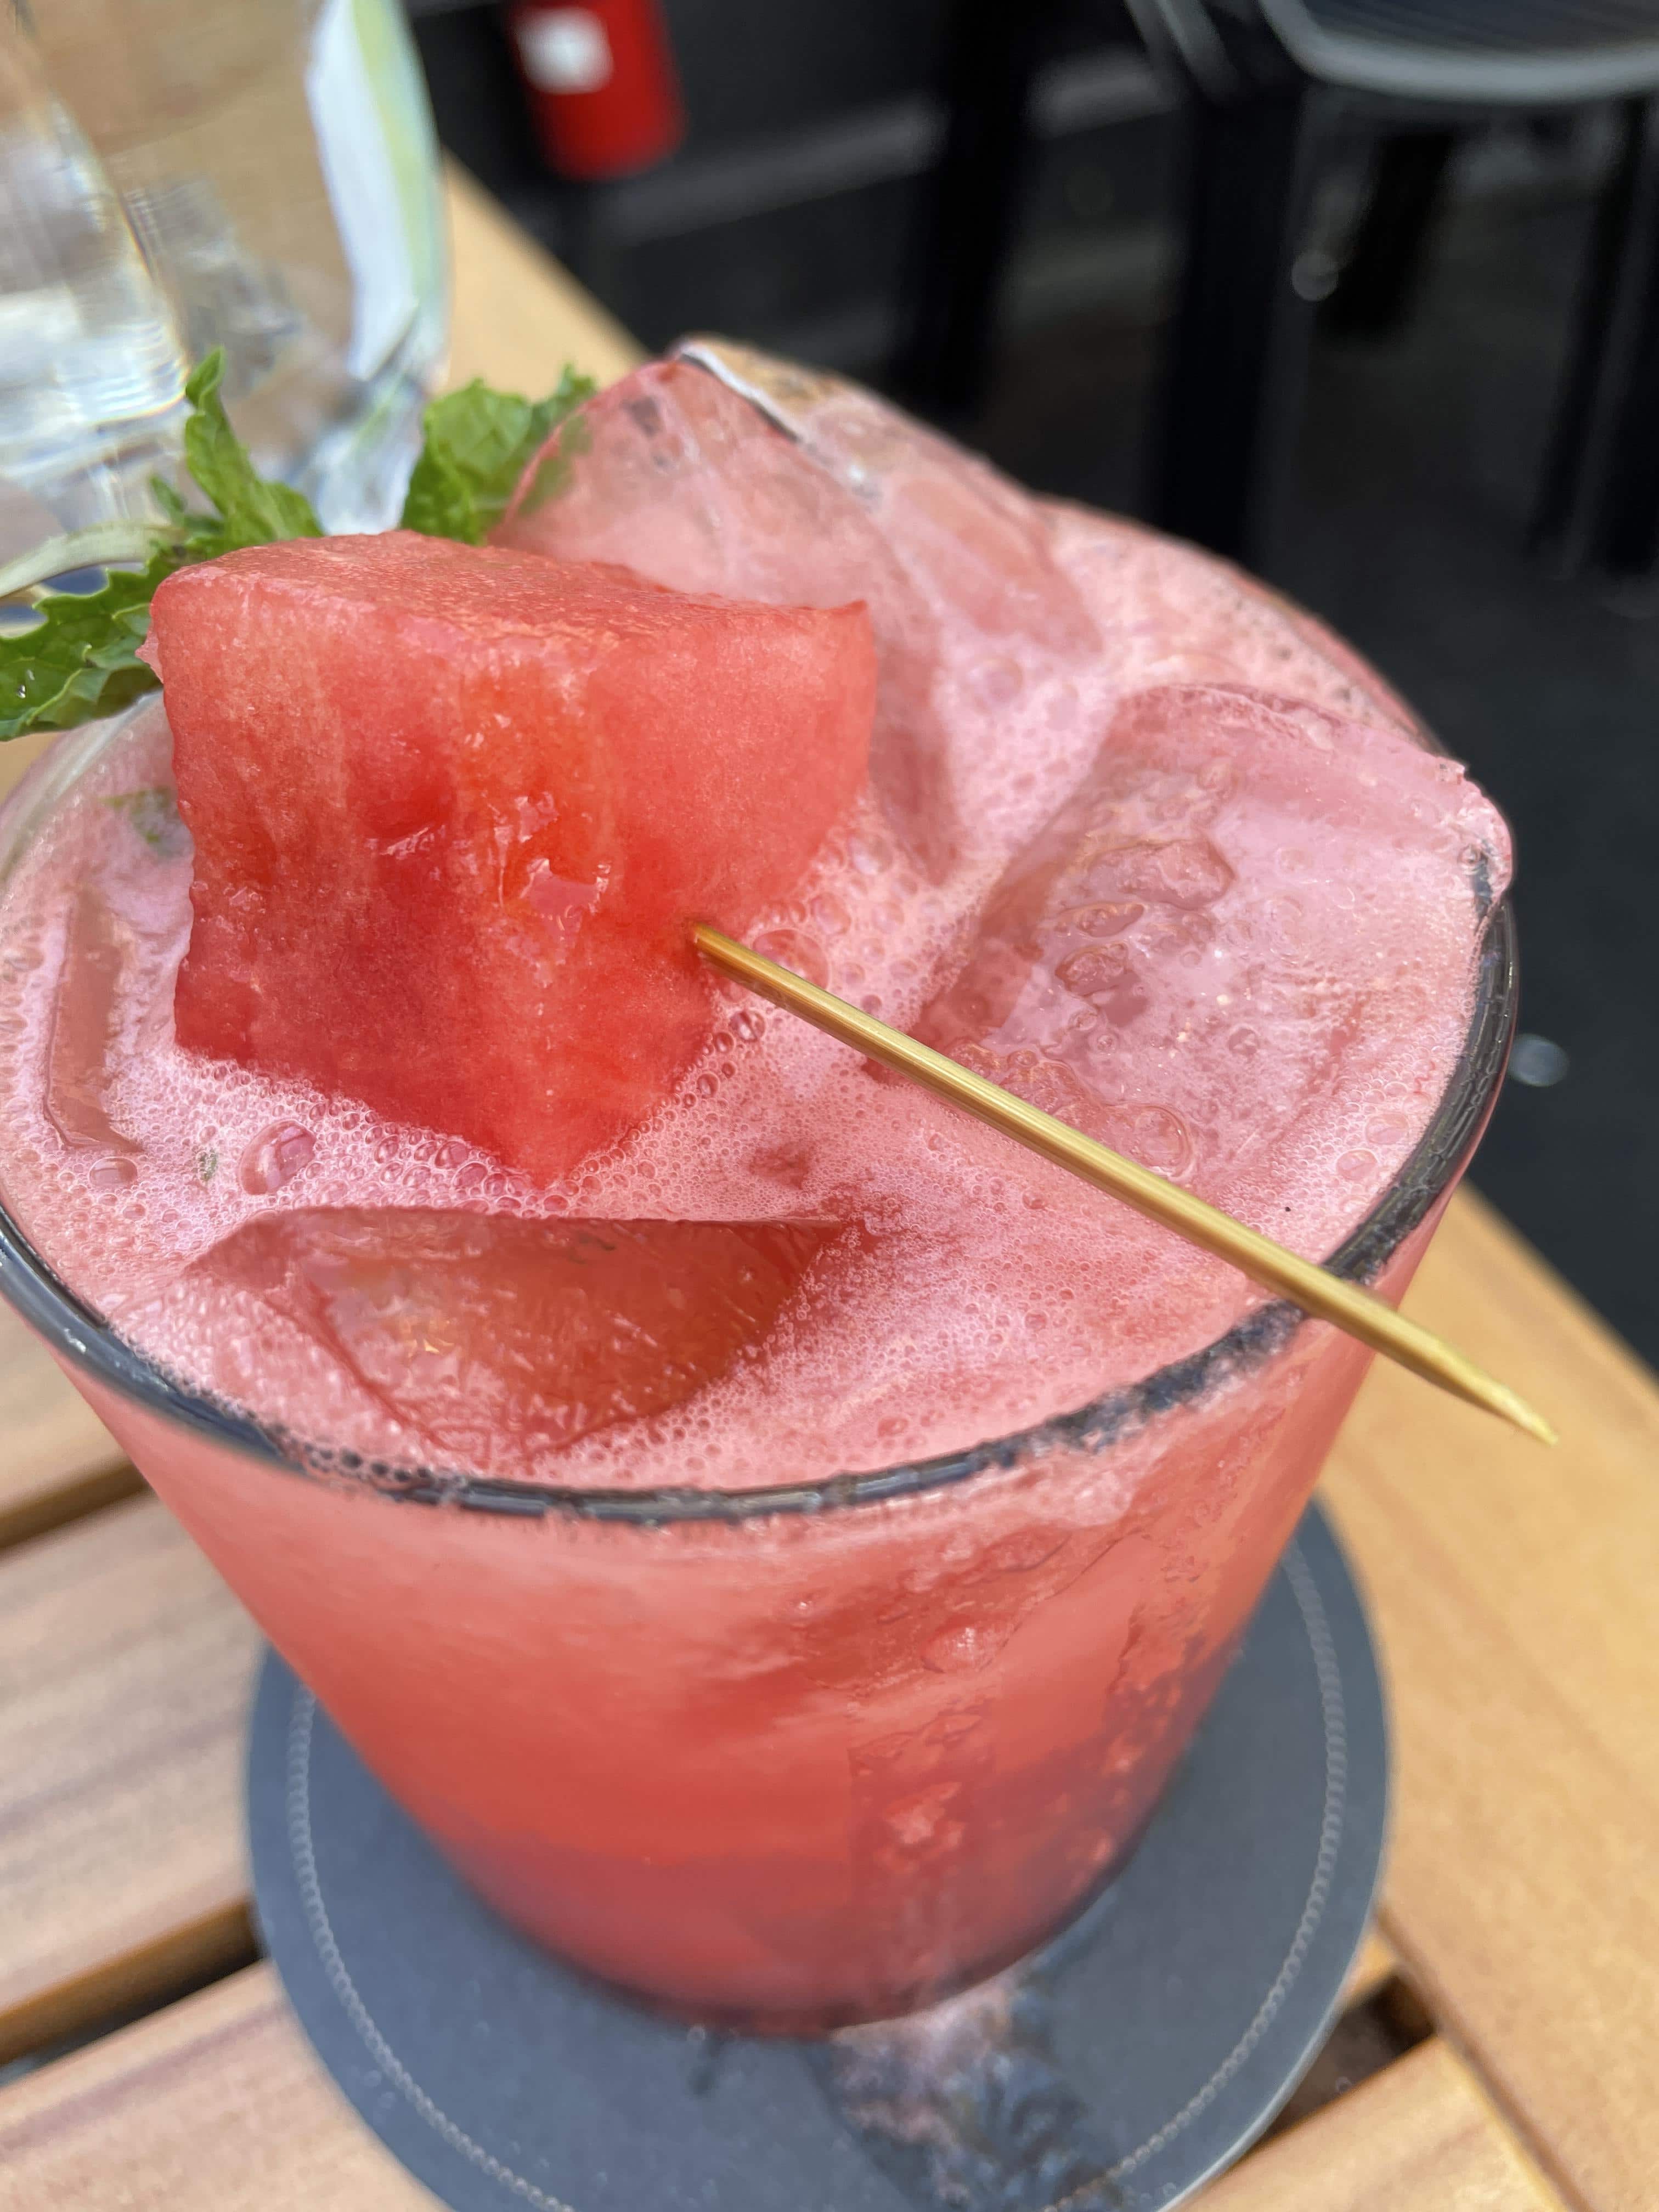 The Watermelon Drink